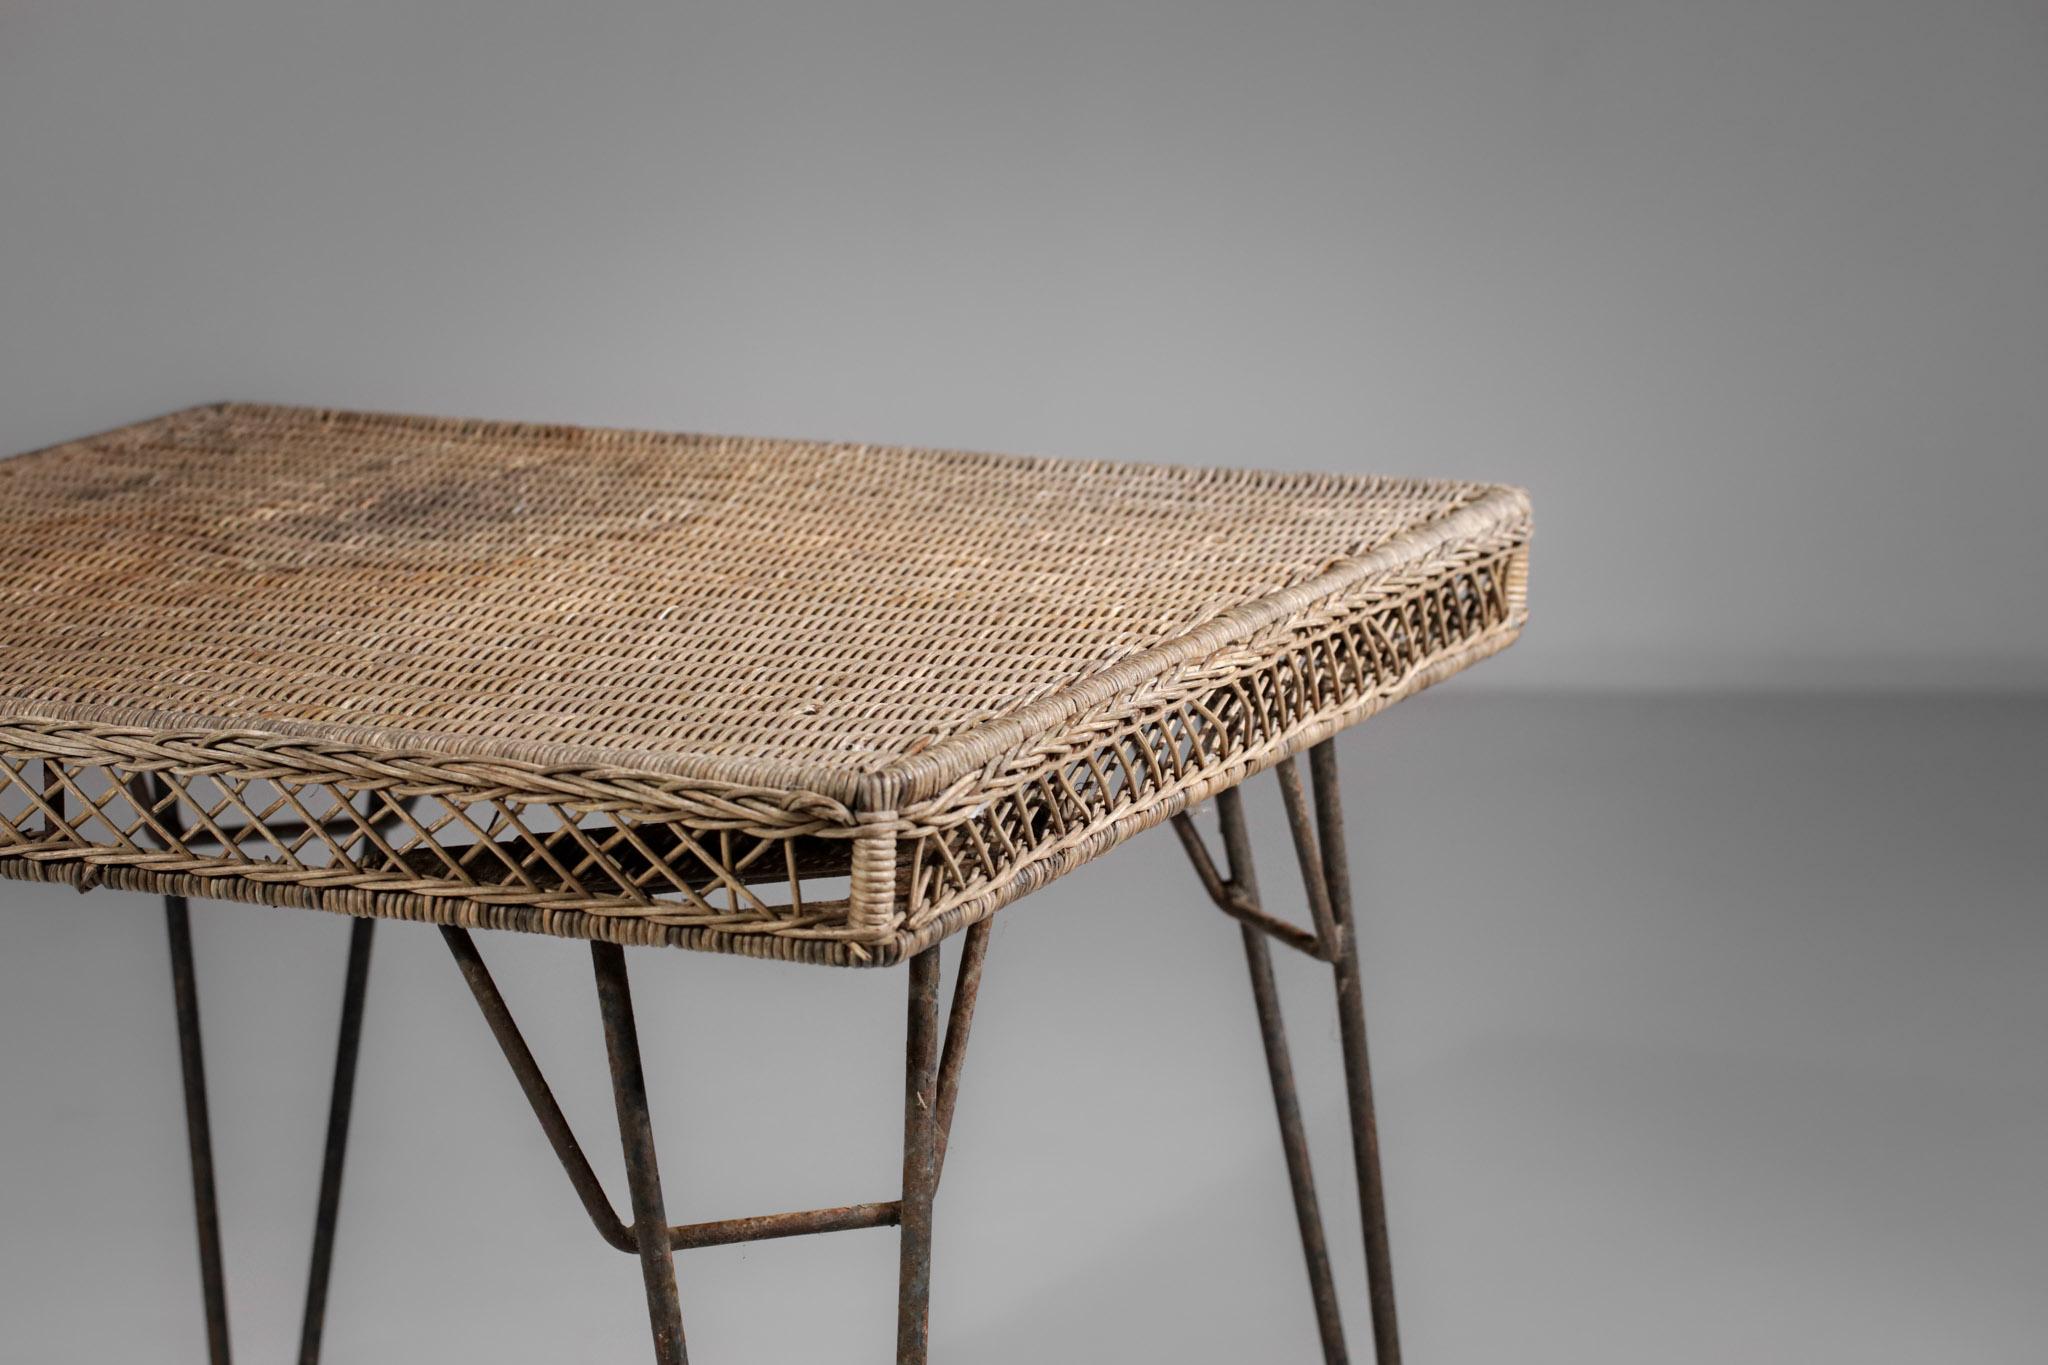 Originale 1950's Vintage Woven Rattan Table Design in the Style of Matégot F332 For Sale 2